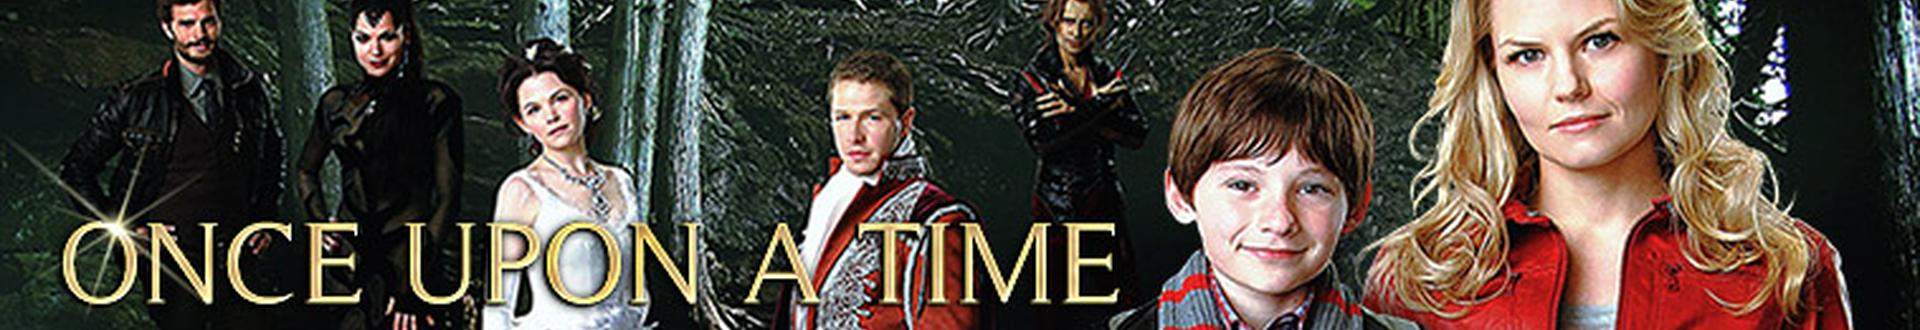 Image illustrative de Once Upon a Time (2011)